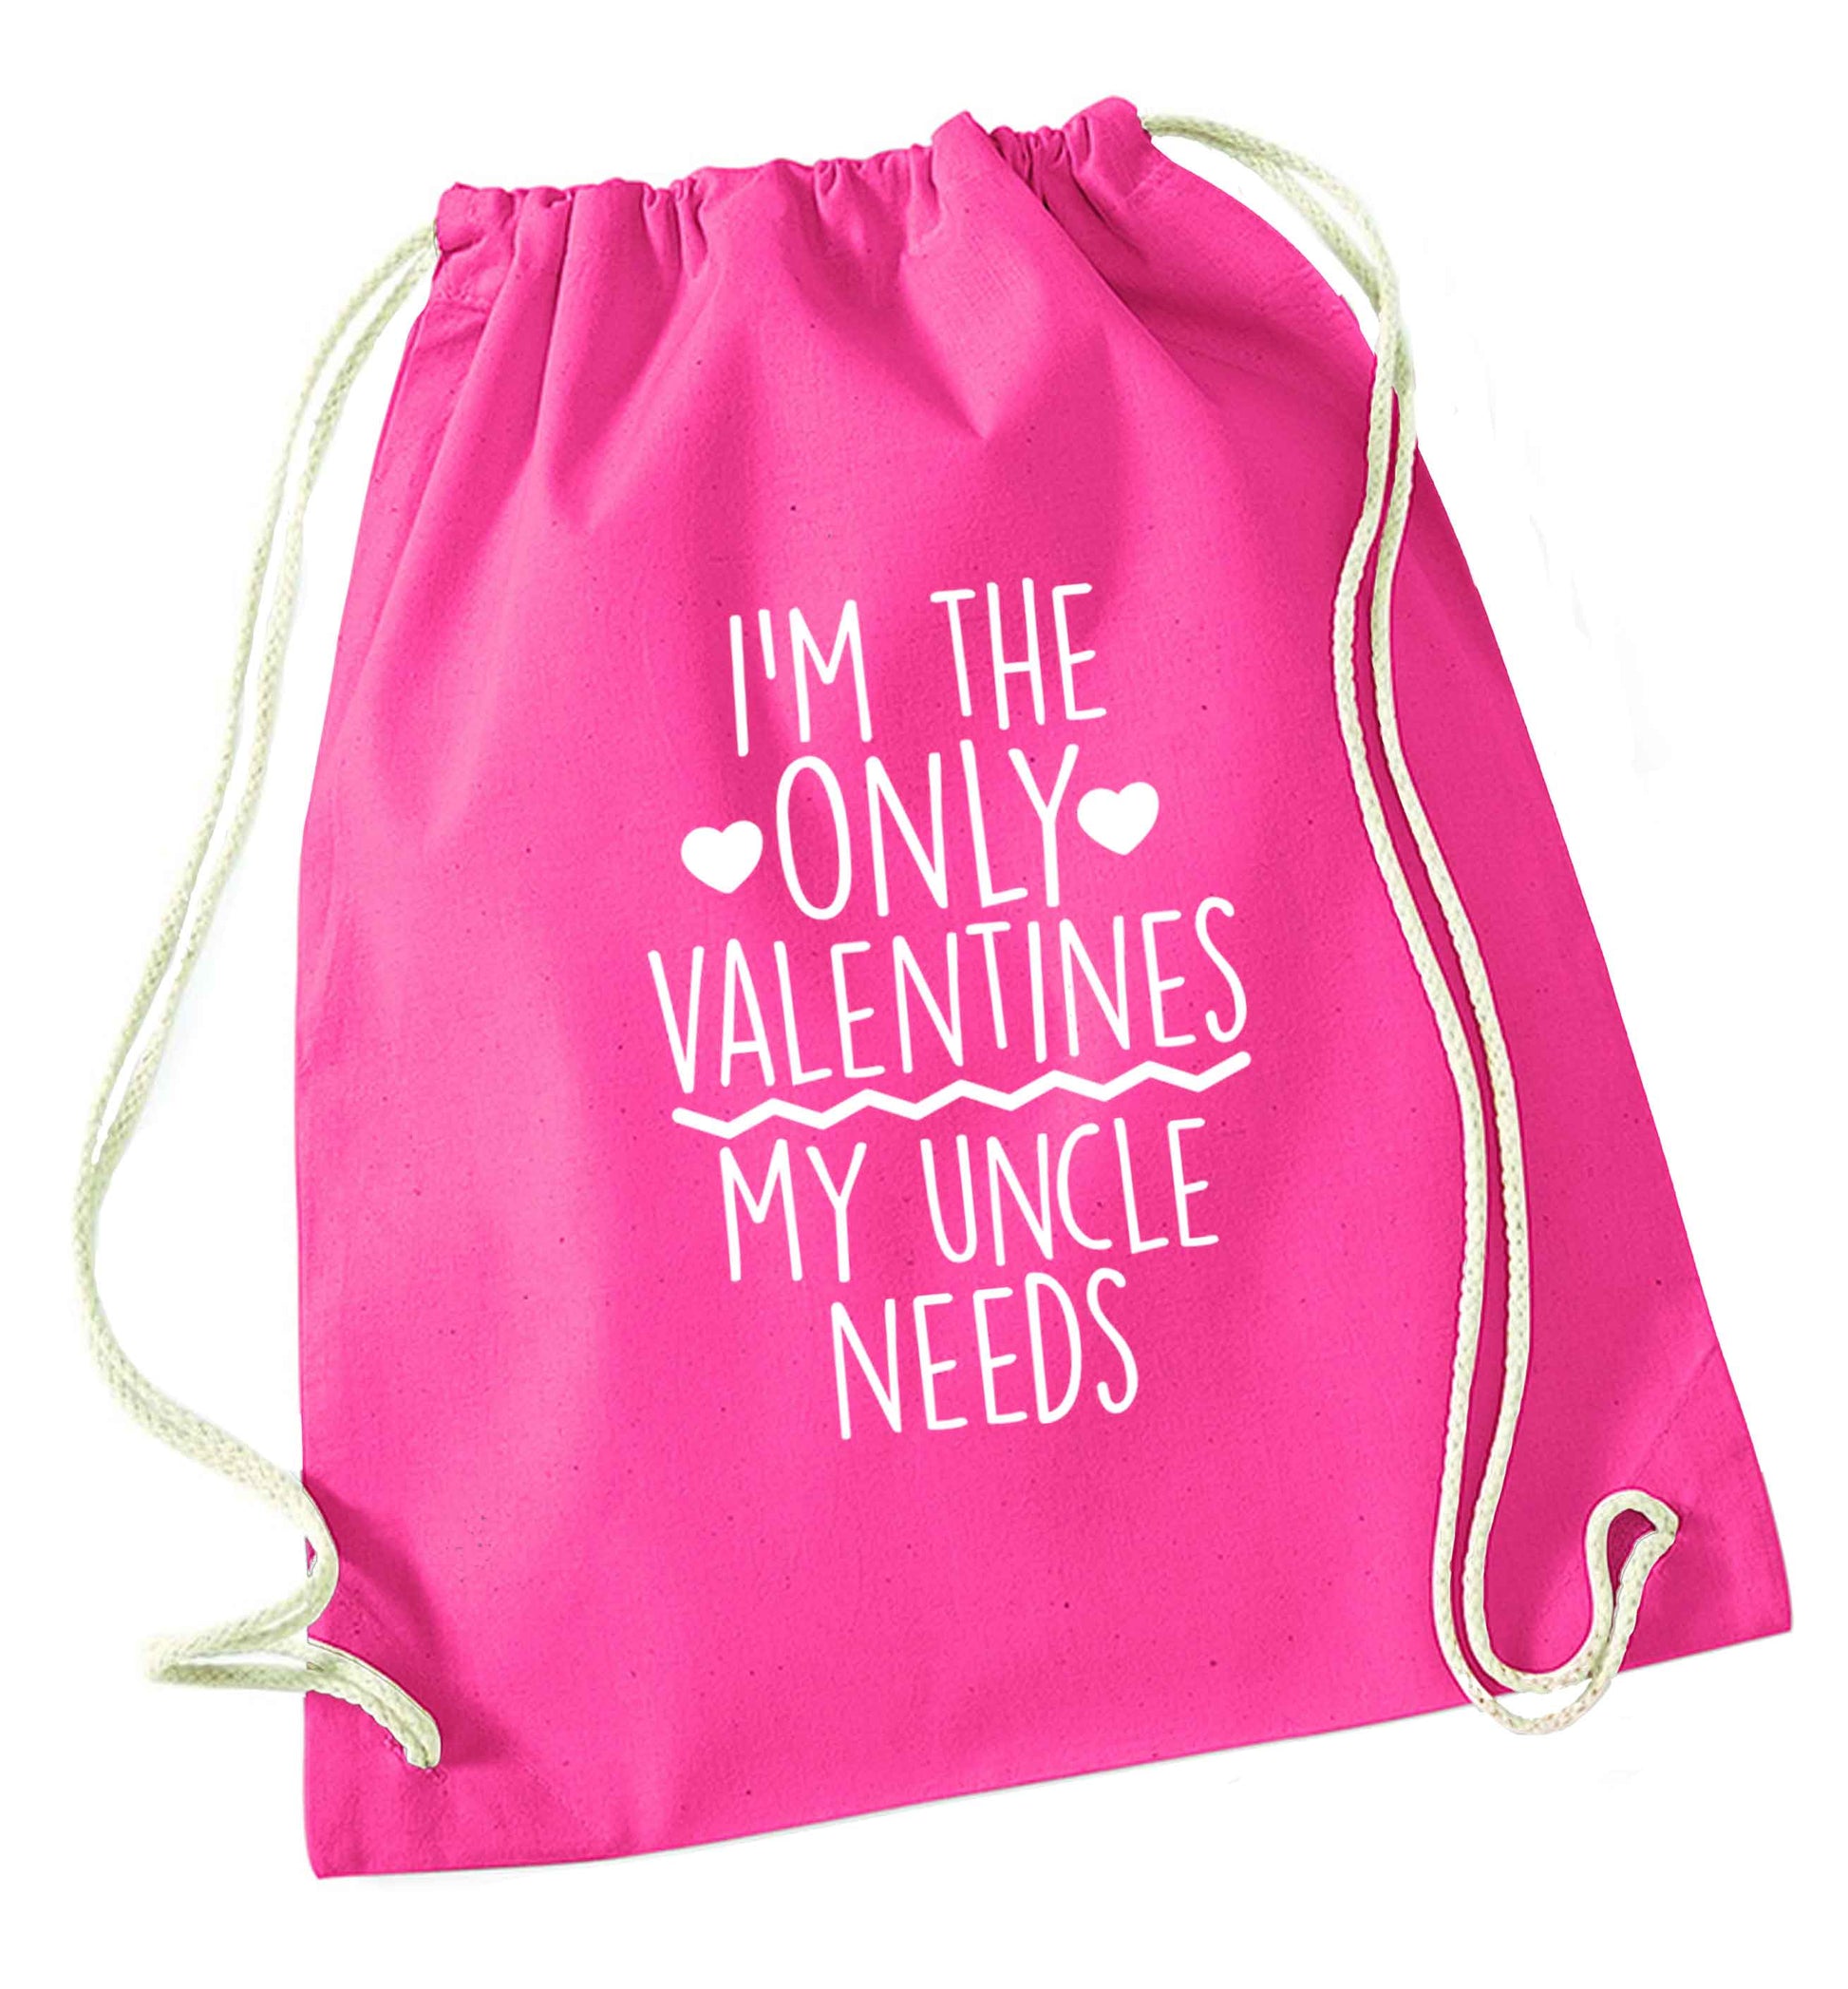 I'm the only valentines my uncle needs pink drawstring bag